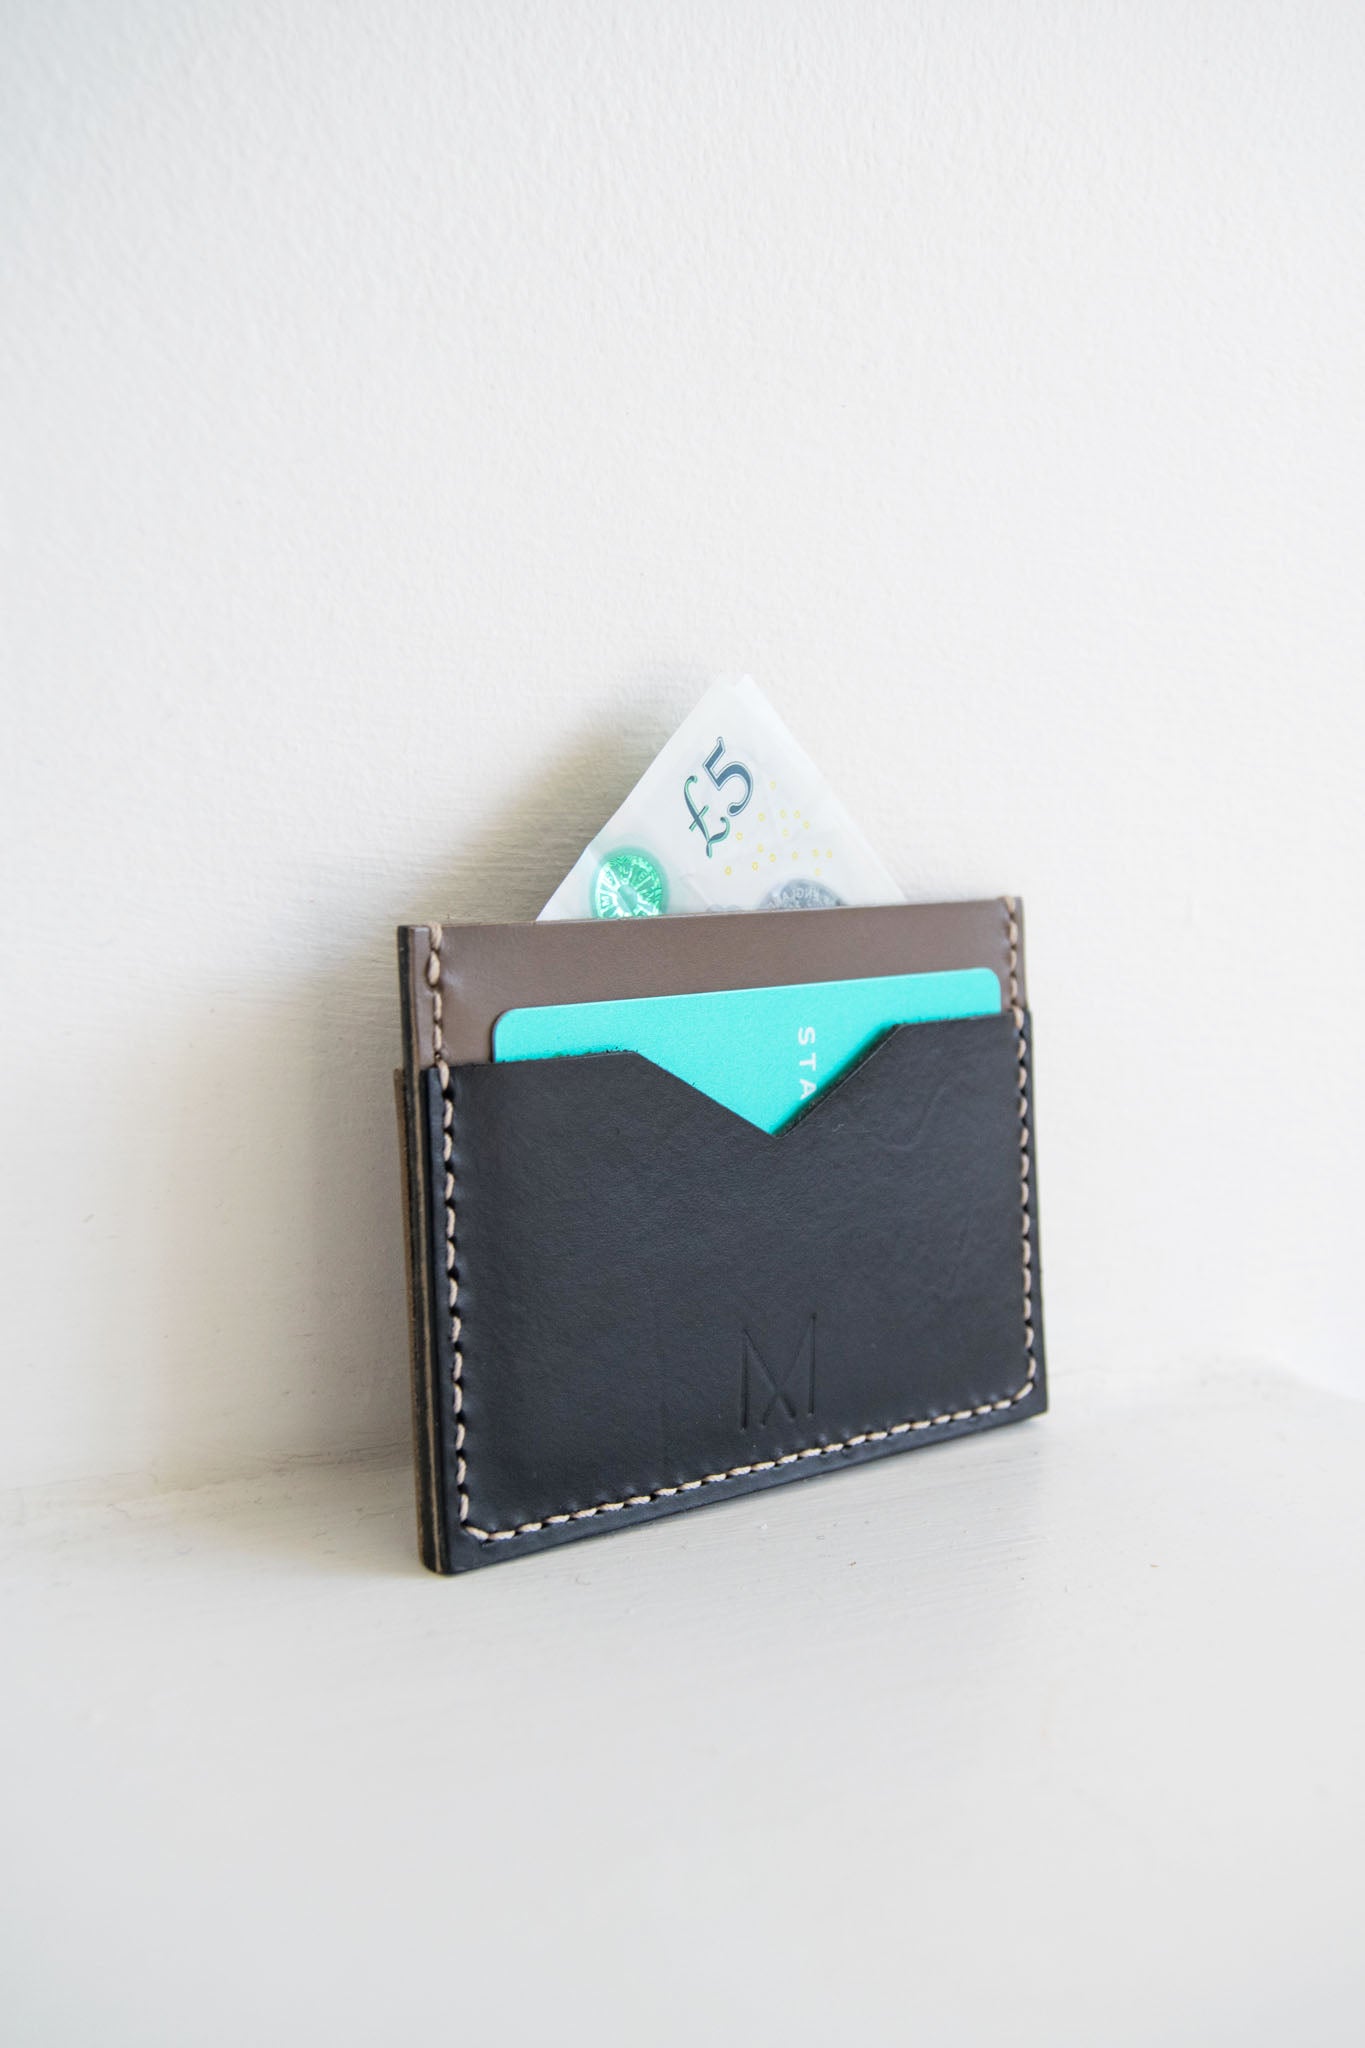 Slim Leather Card Holder in Black & Taupe